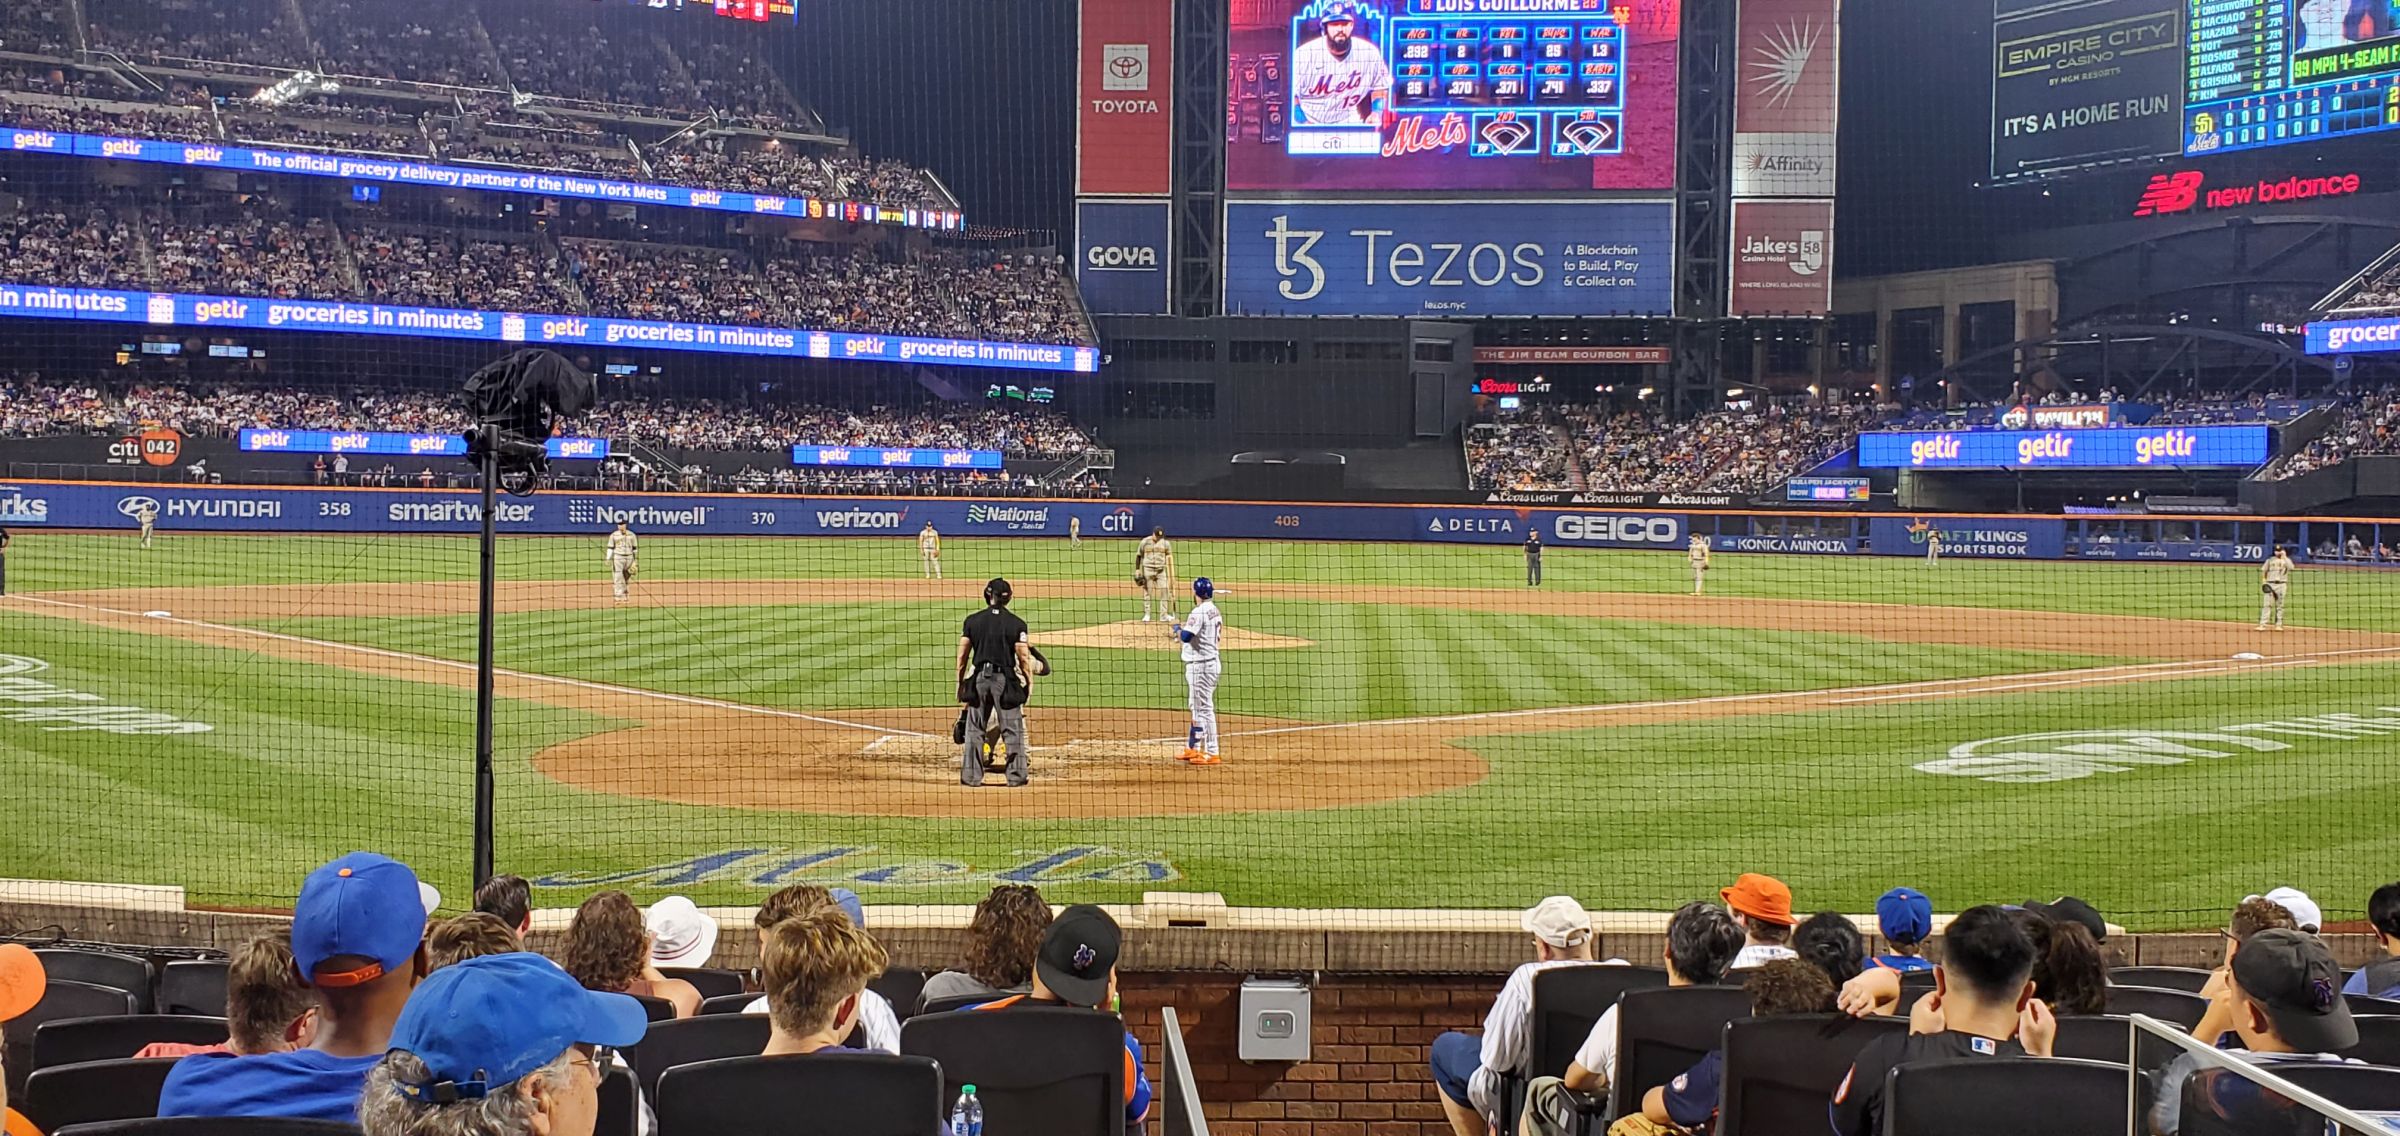 section 15, row 9 seat view  - citi field